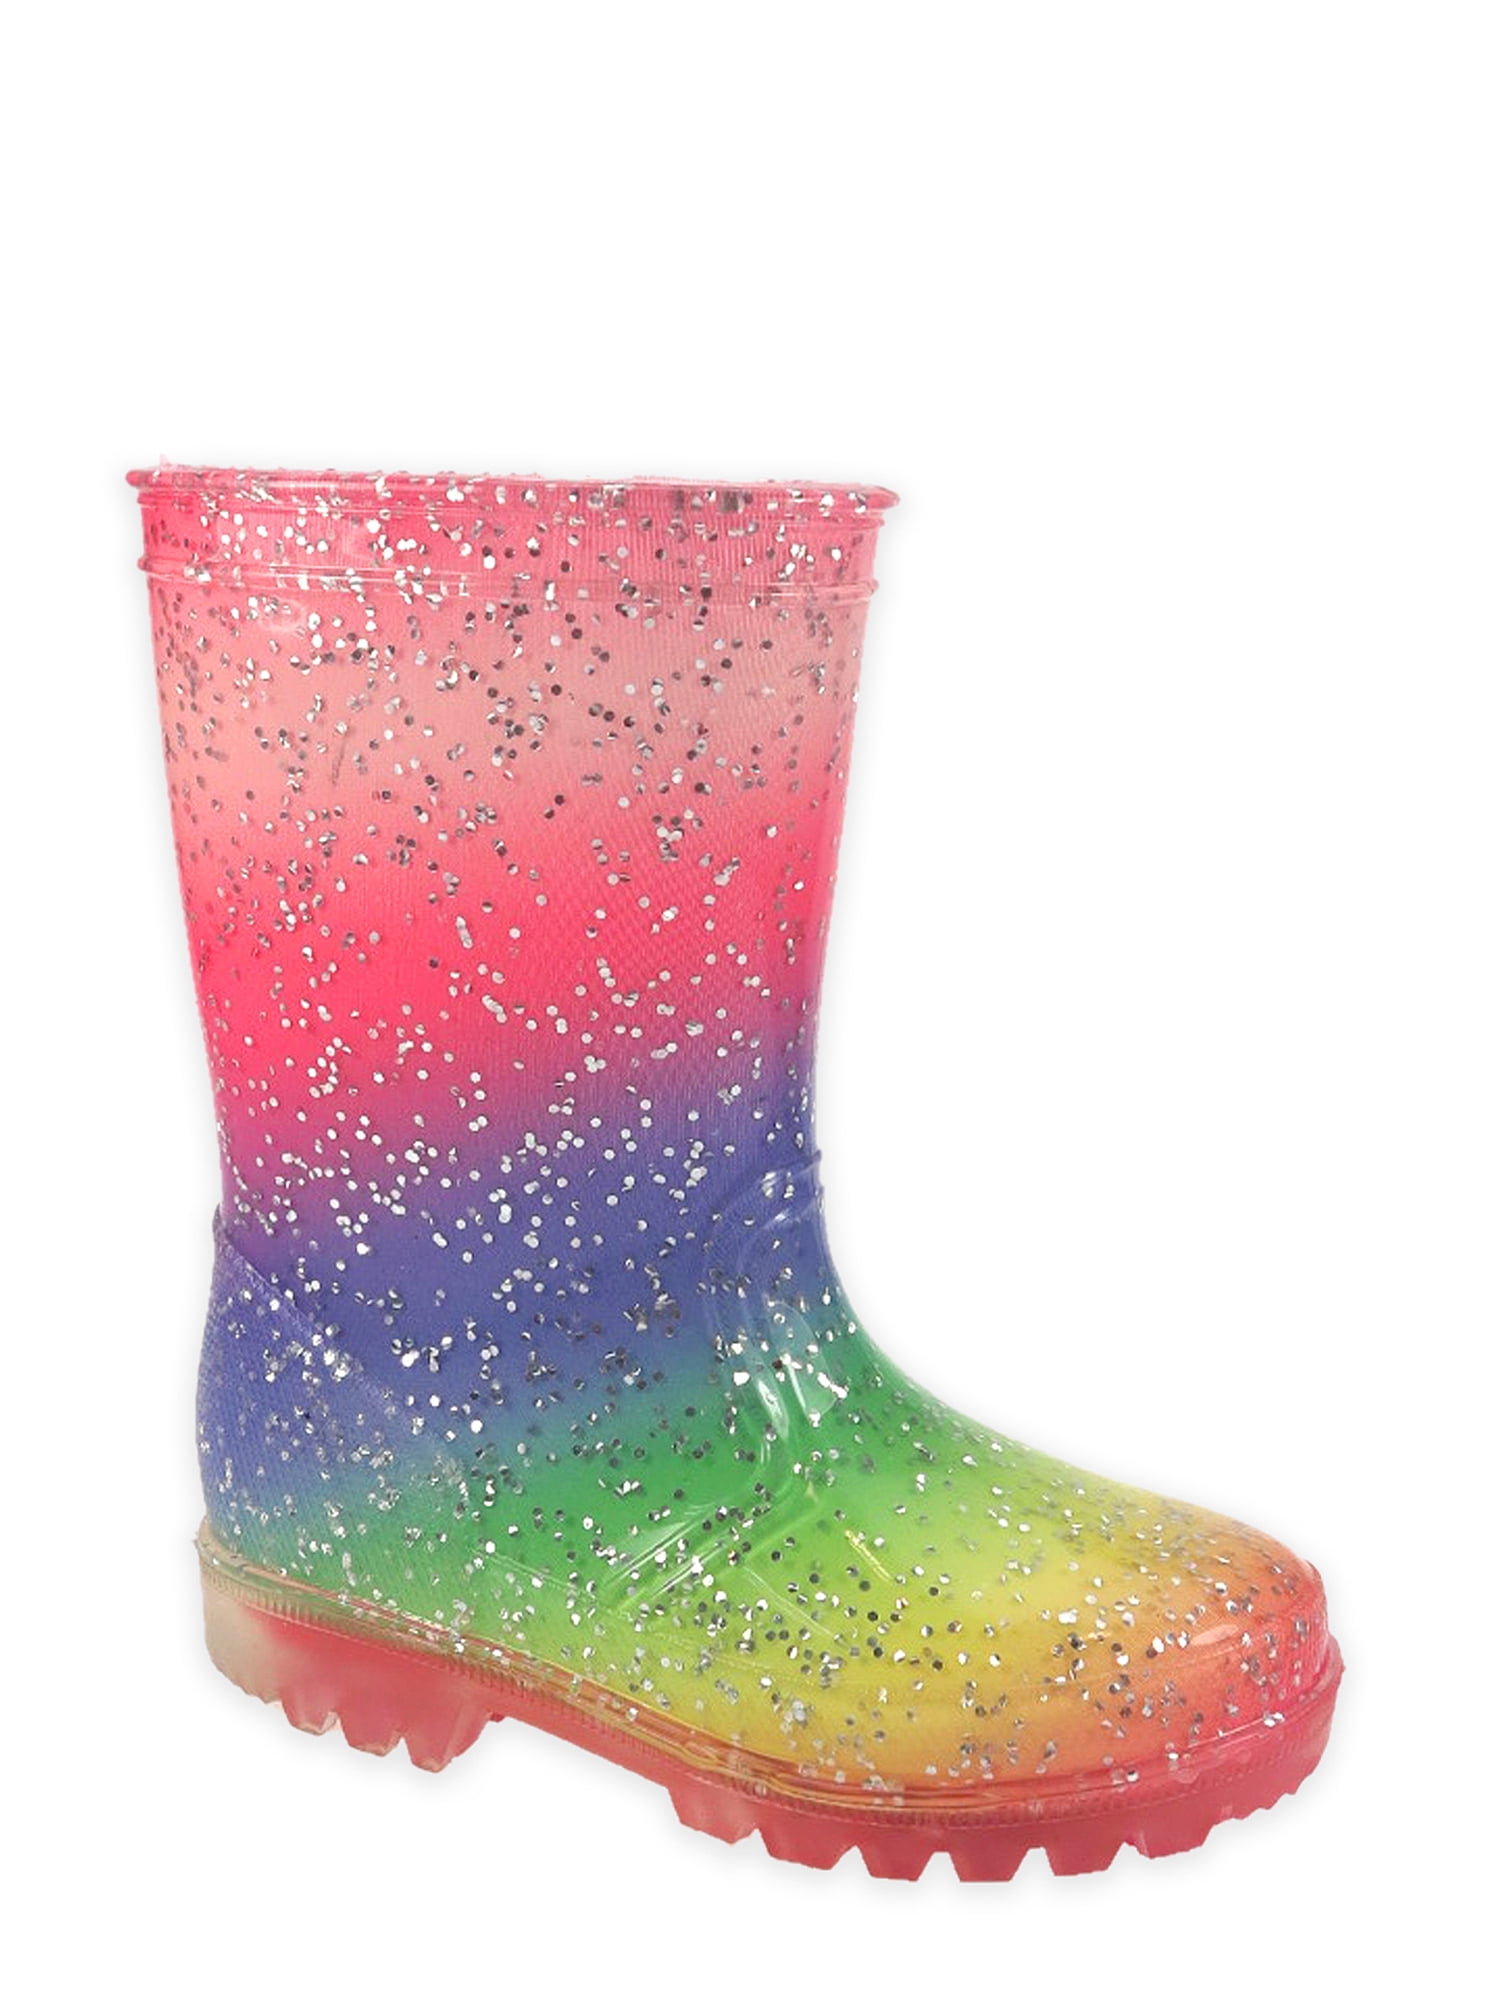 Luisaviaroma Girls Shoes Boots Rain Boots Planet Scented Rubber Rain Boots 